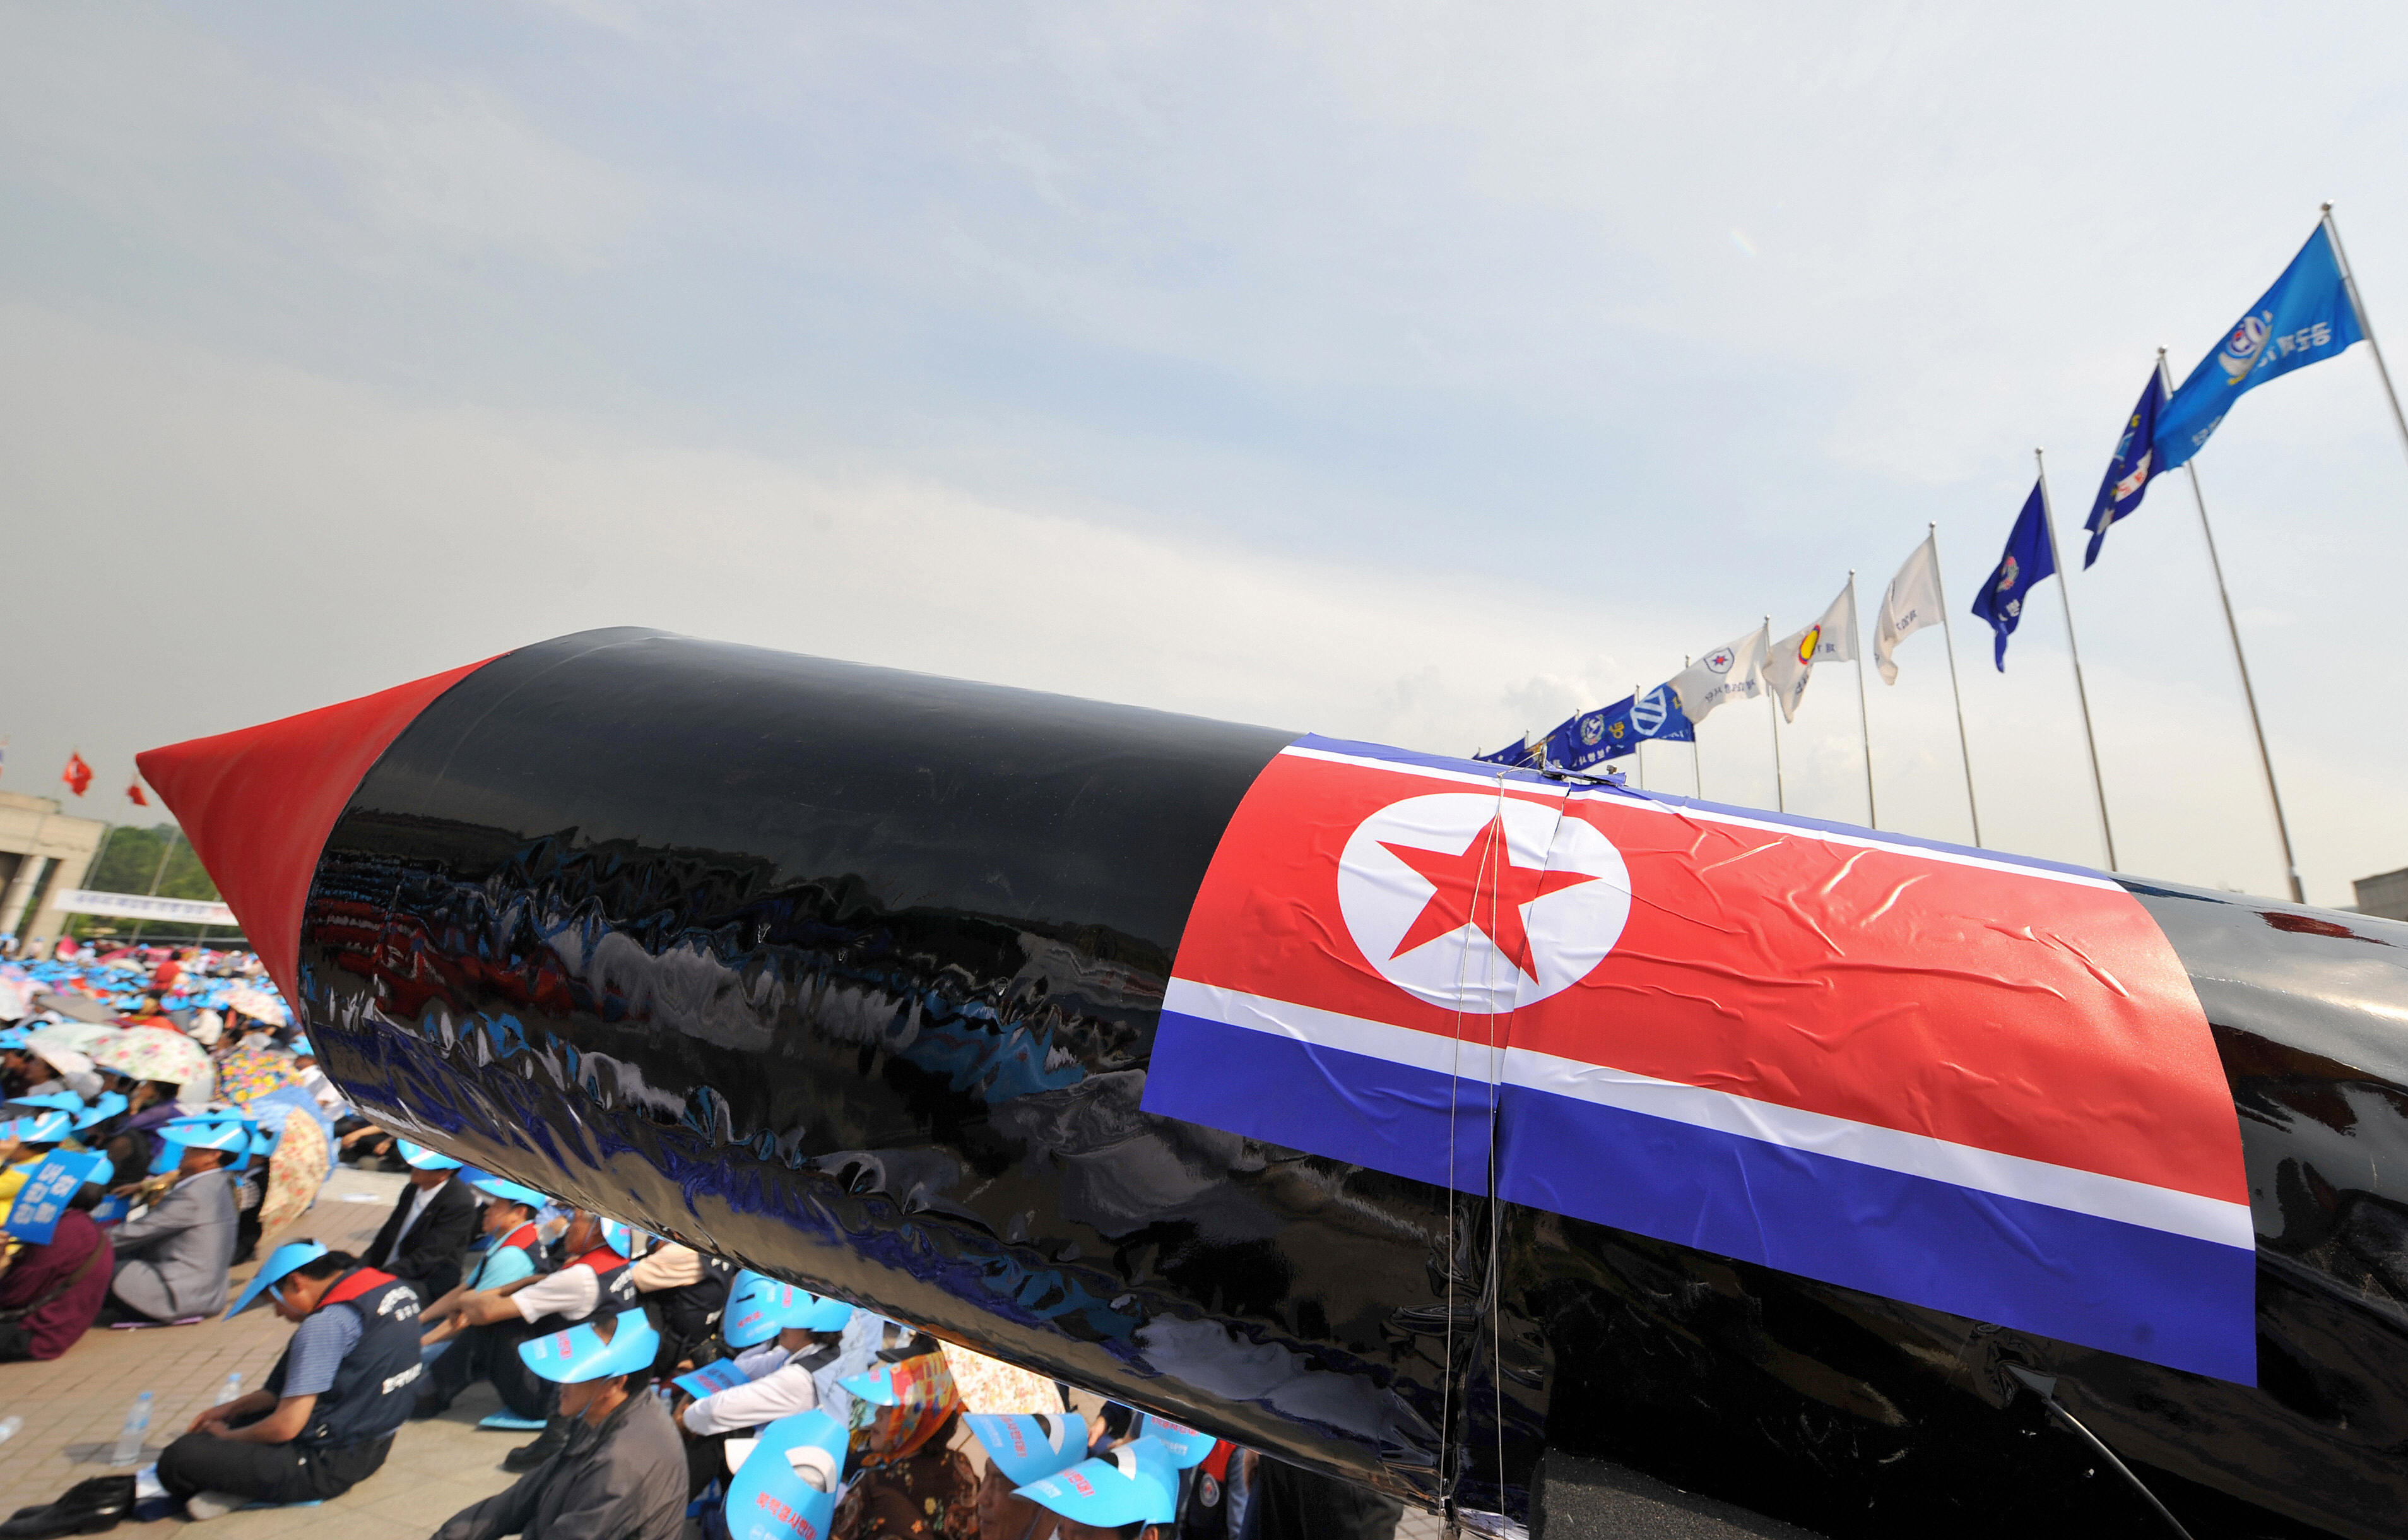 A mock North Korean missile is pictured during a rally denouncing North Korea's nuclear test and its recent missile launches, at the War Memorial of Korea in Seoul on June 4, 2009. (Kim Jae-Hwan—AFP/Getty Images)